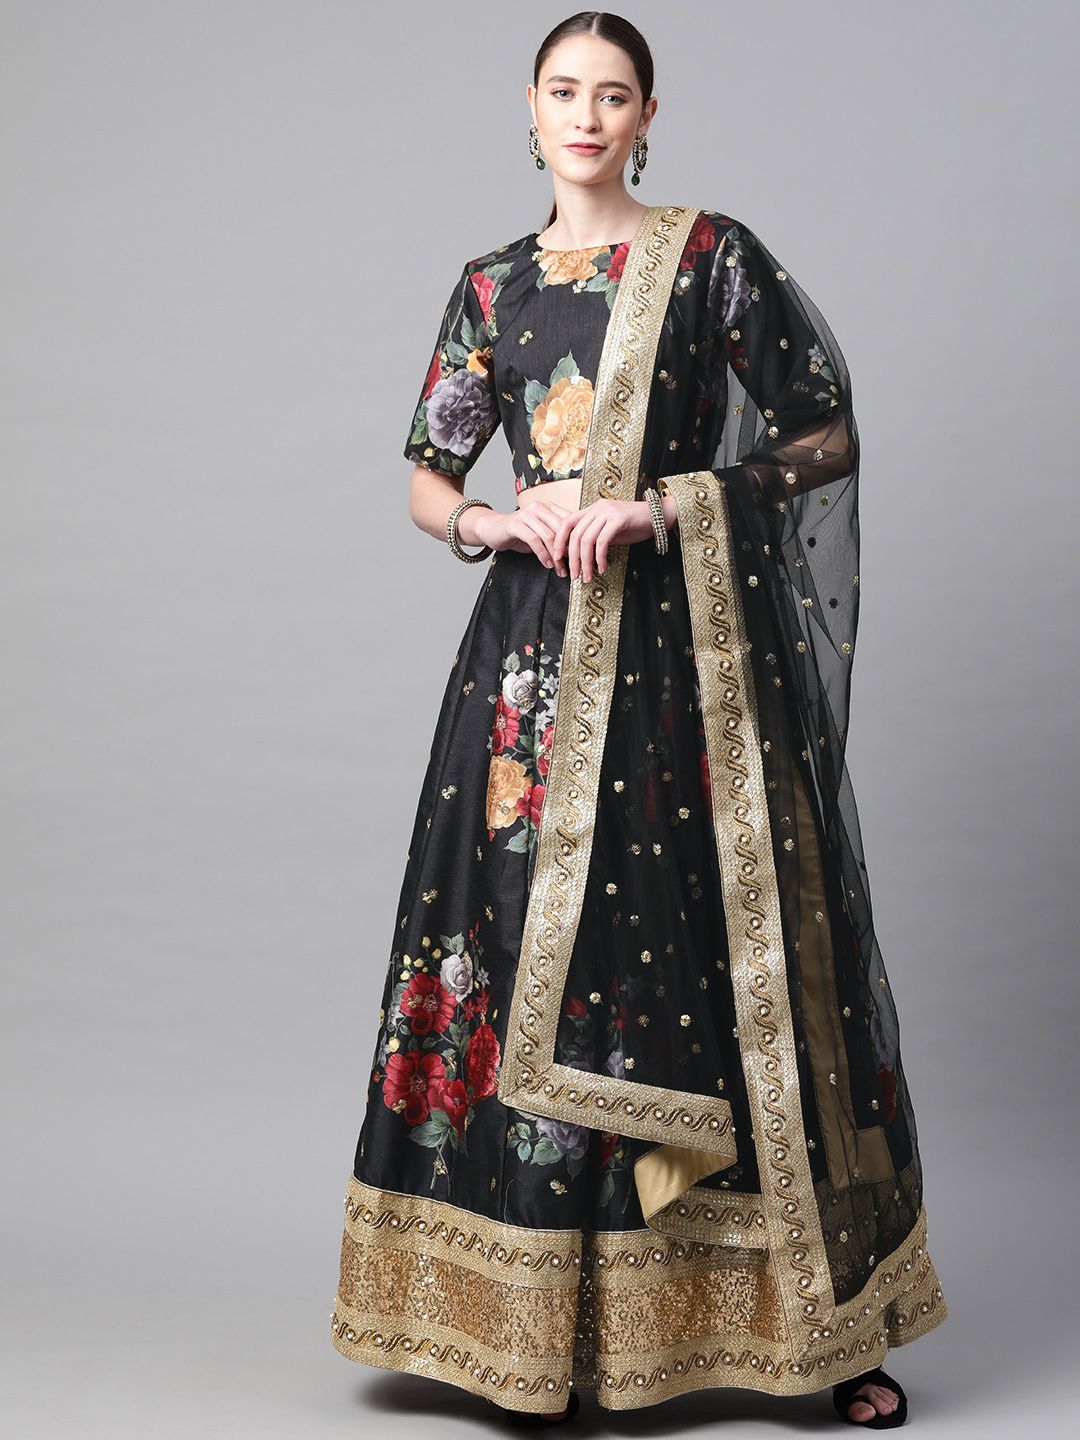 Readiprint Fashions Black & Red Printed Semi-Stitched Lehenga & Blouse with Dupatta Price in India